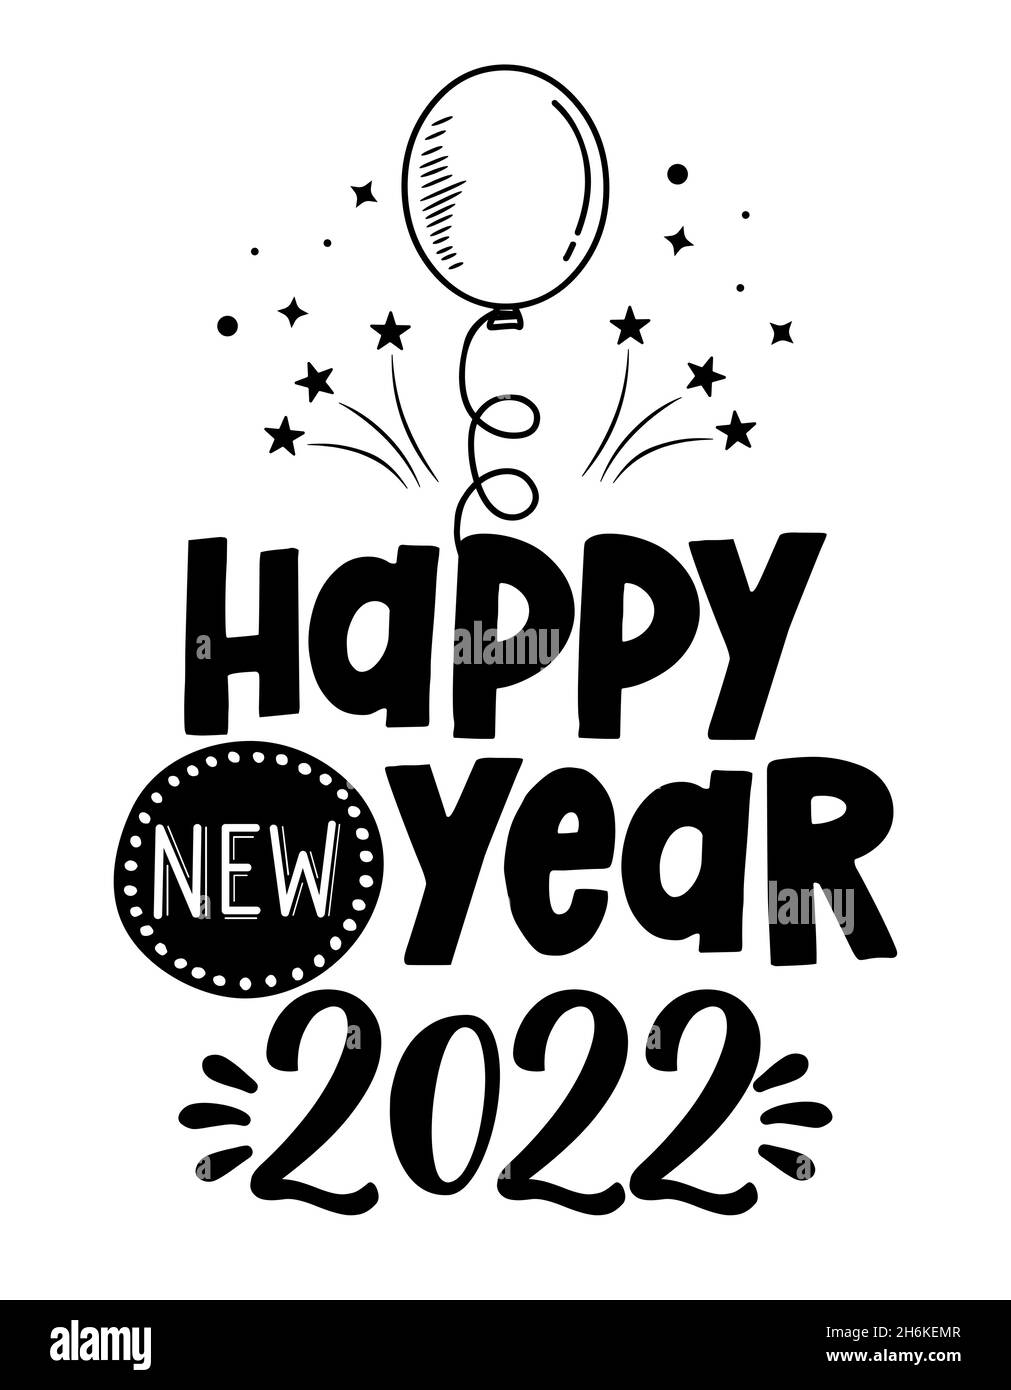 Happy New Year 2022 - Inspirational New Year beautiful handwritten quote, gift tag, lettering message. Hand drawn winter, January phrase. Handwritten Stock Vector